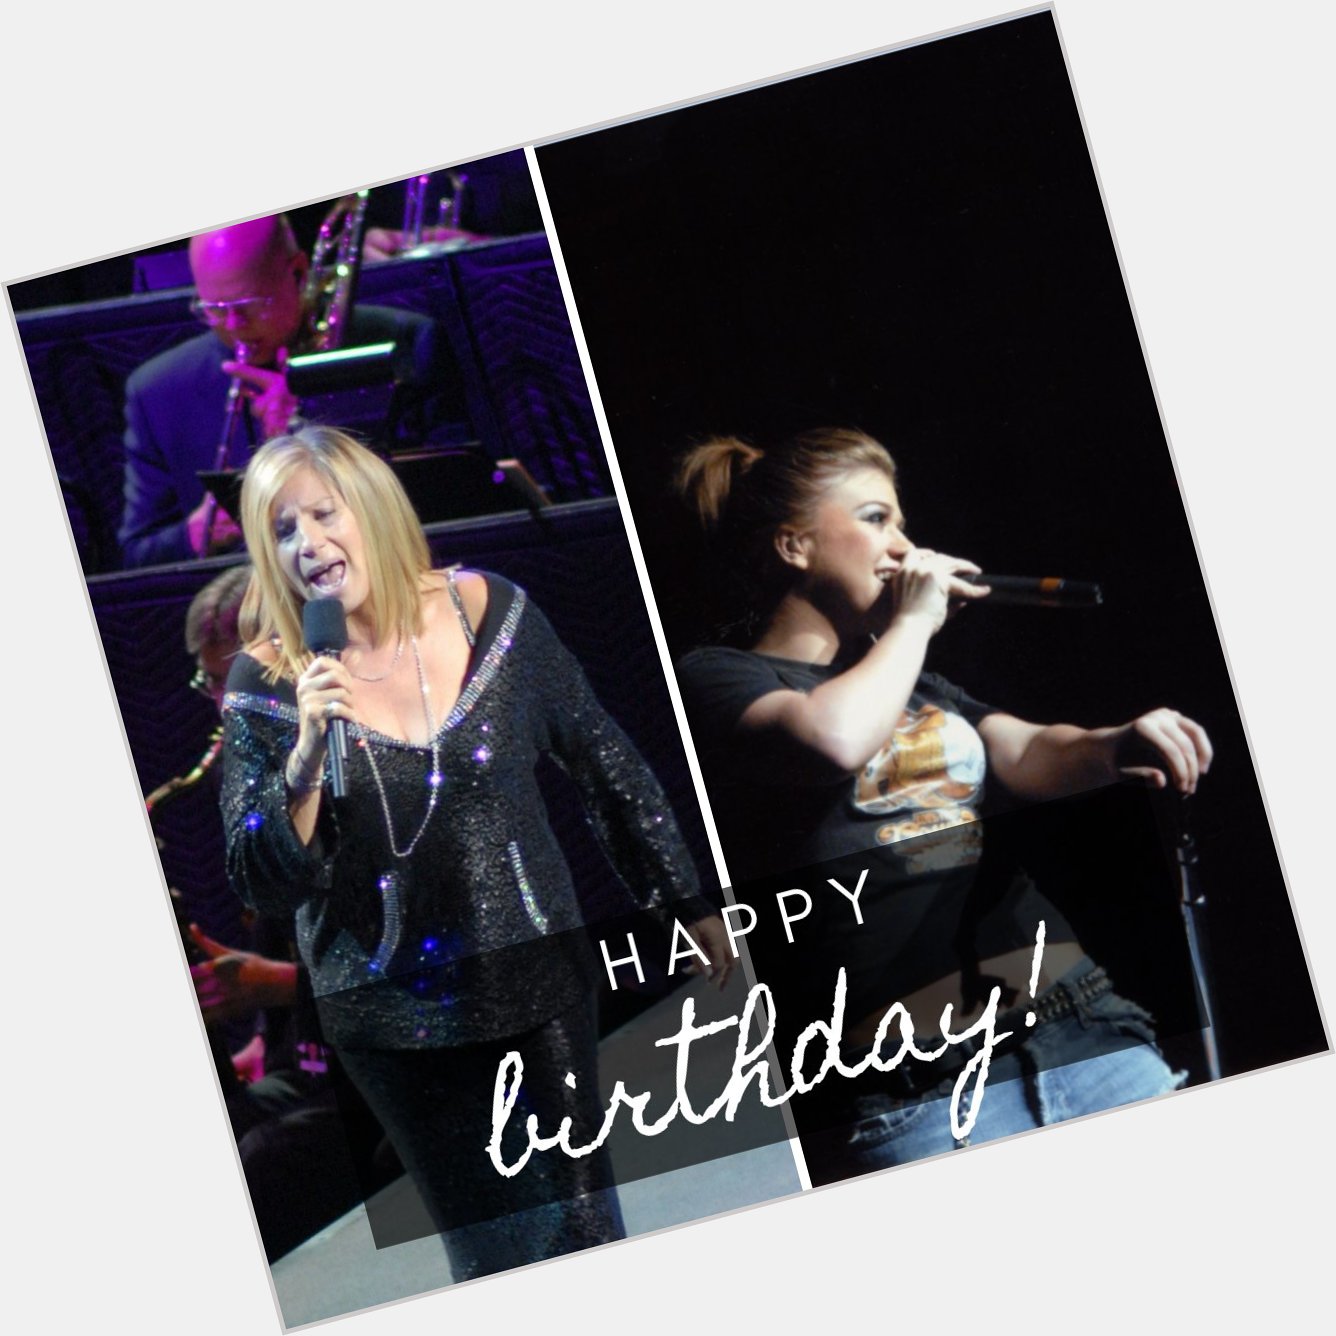 Did you know Kelly Clarkson & Barbara Streisand share a birthday today?
Wishing both of them a very happy birthday! 